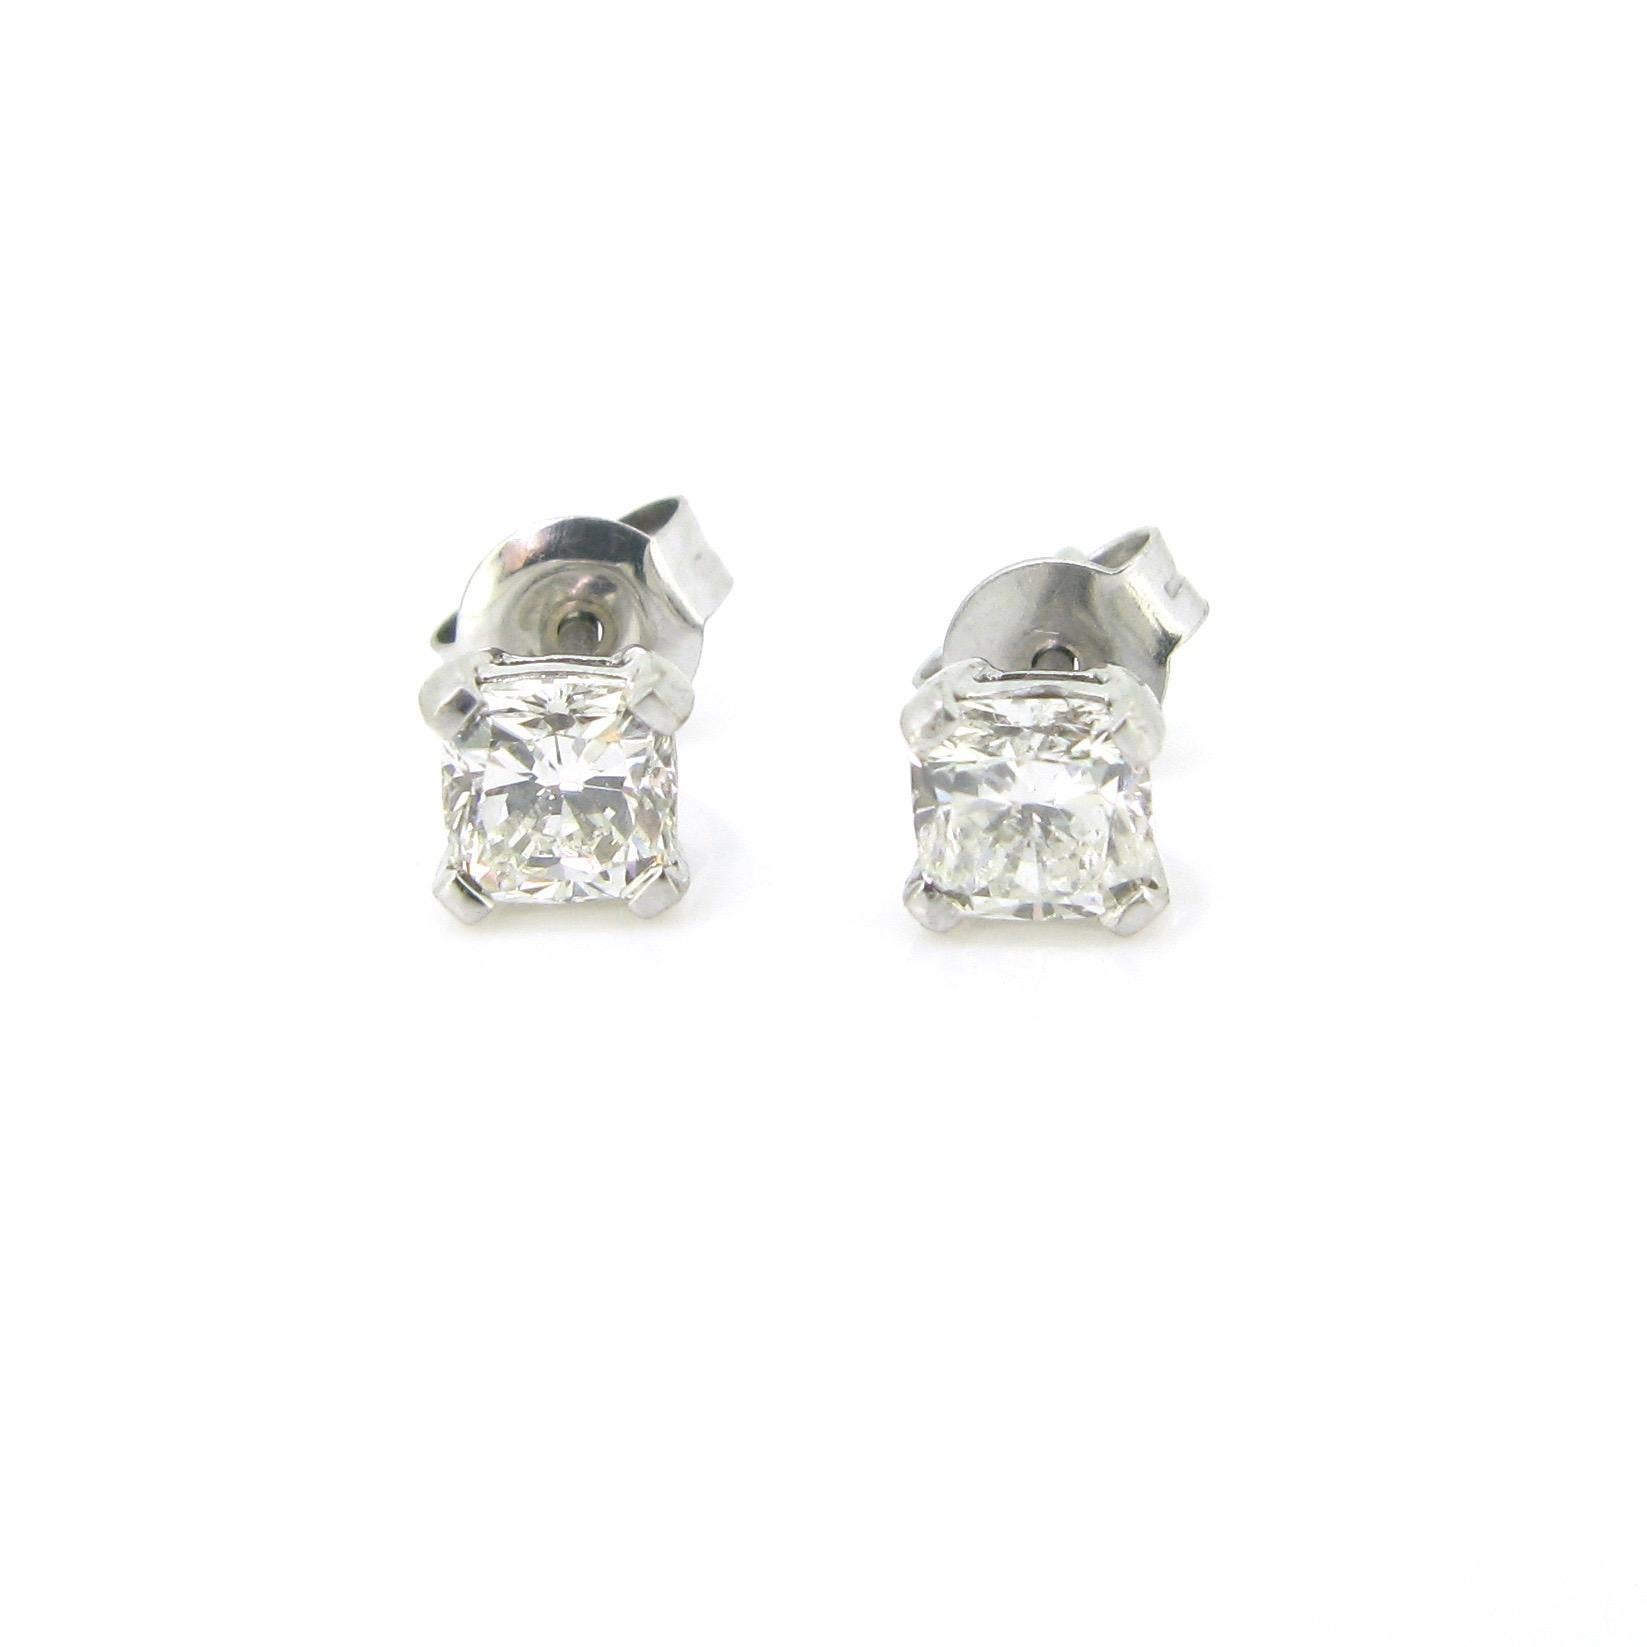 The brilliant cut diamonds are set on 18kt white gold. Each of them weight 0.63ct  : one is H/SI and the second one is I/VS. The earrings weigh 1,70gr and they remain properly on the ear thank to the clasp. These are perfect for everyday.

Weight :